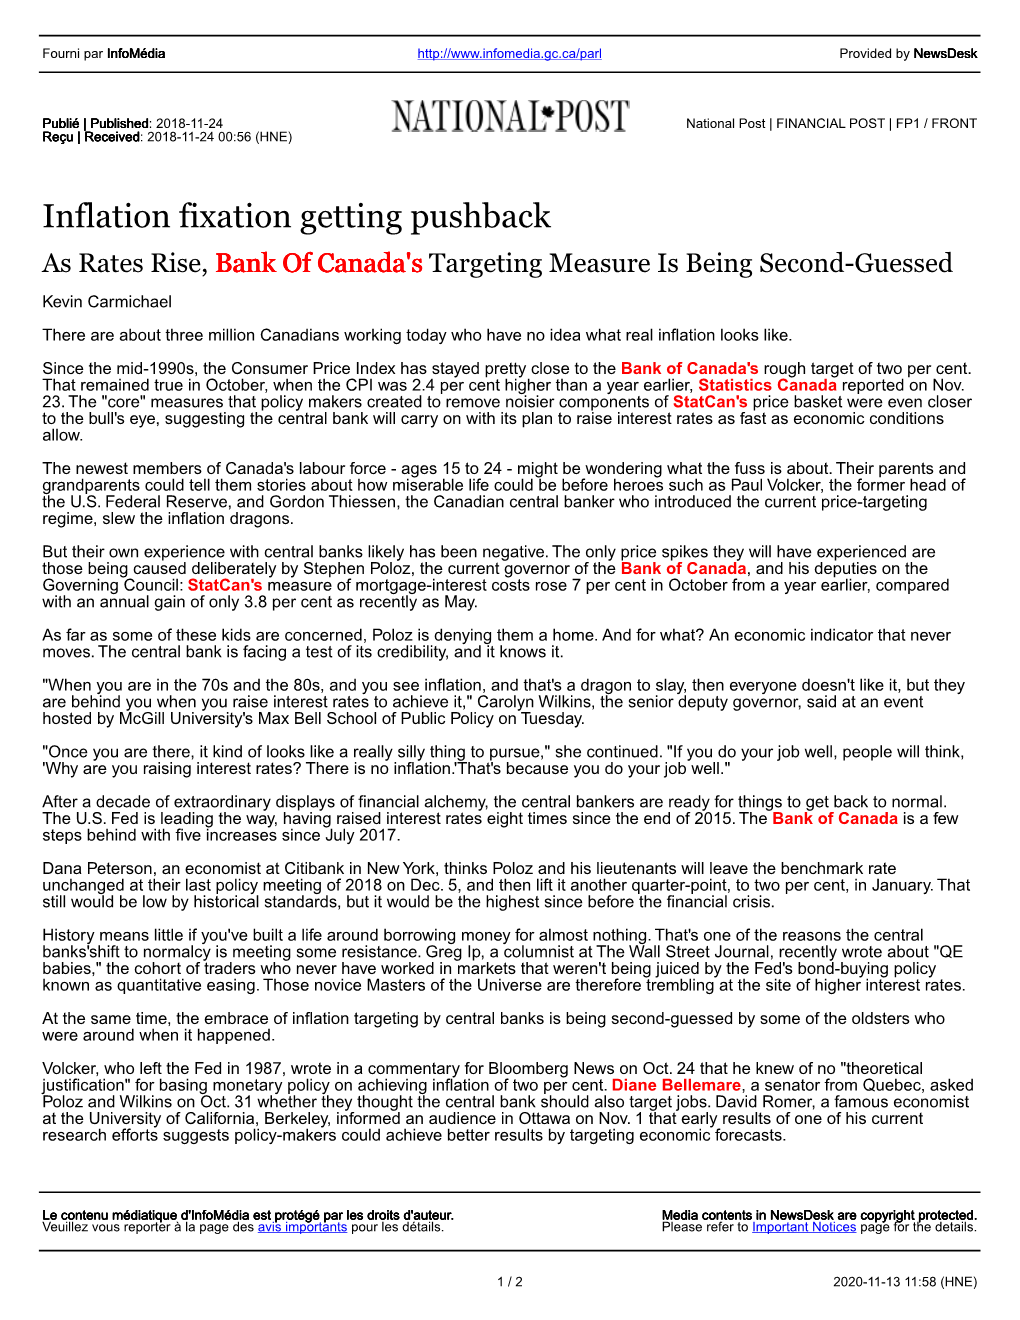 Inflation Fixation Getting Pushback